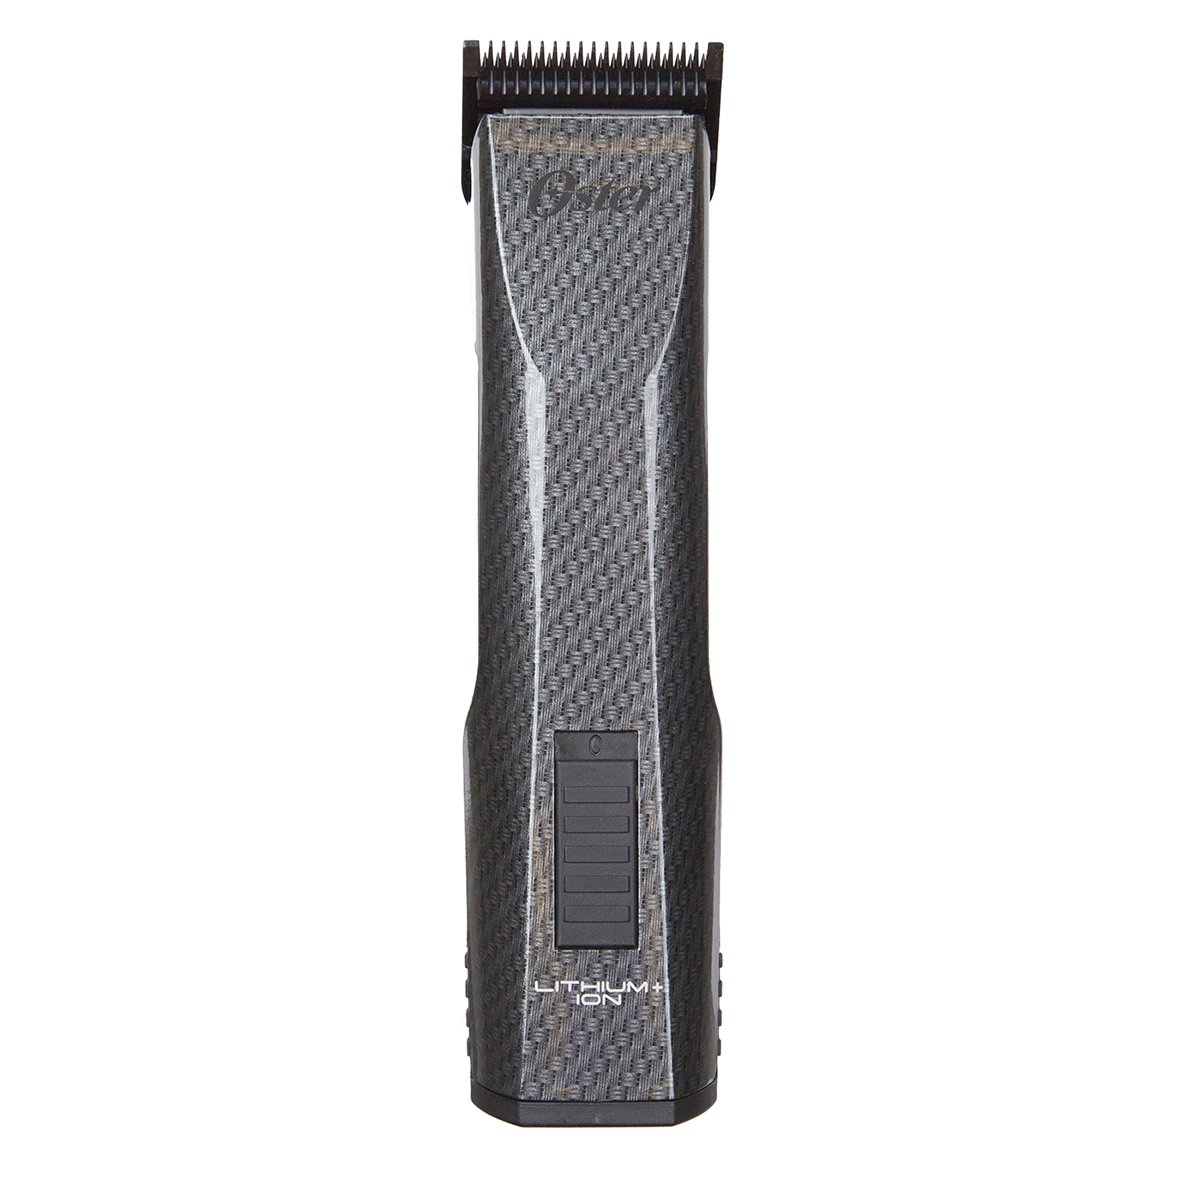 professional hair clippers oster